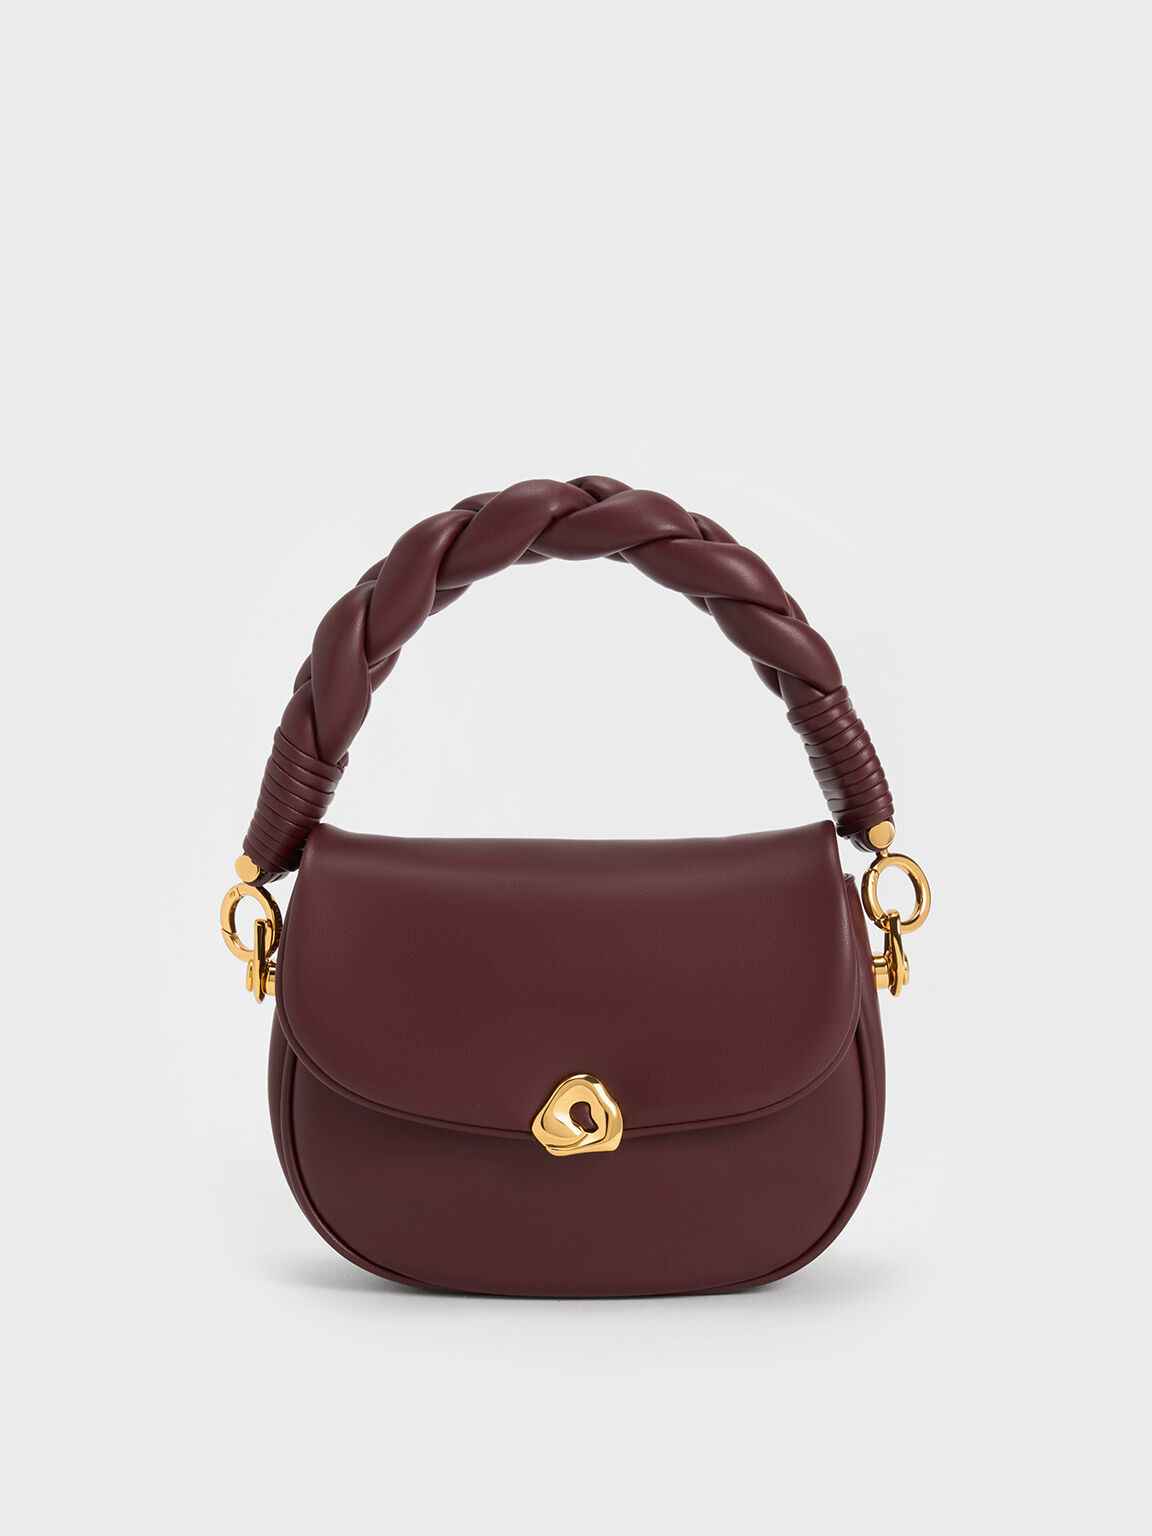 Women’s New Arrival Bags | Latest Styles | CHARLES & KEITH IT